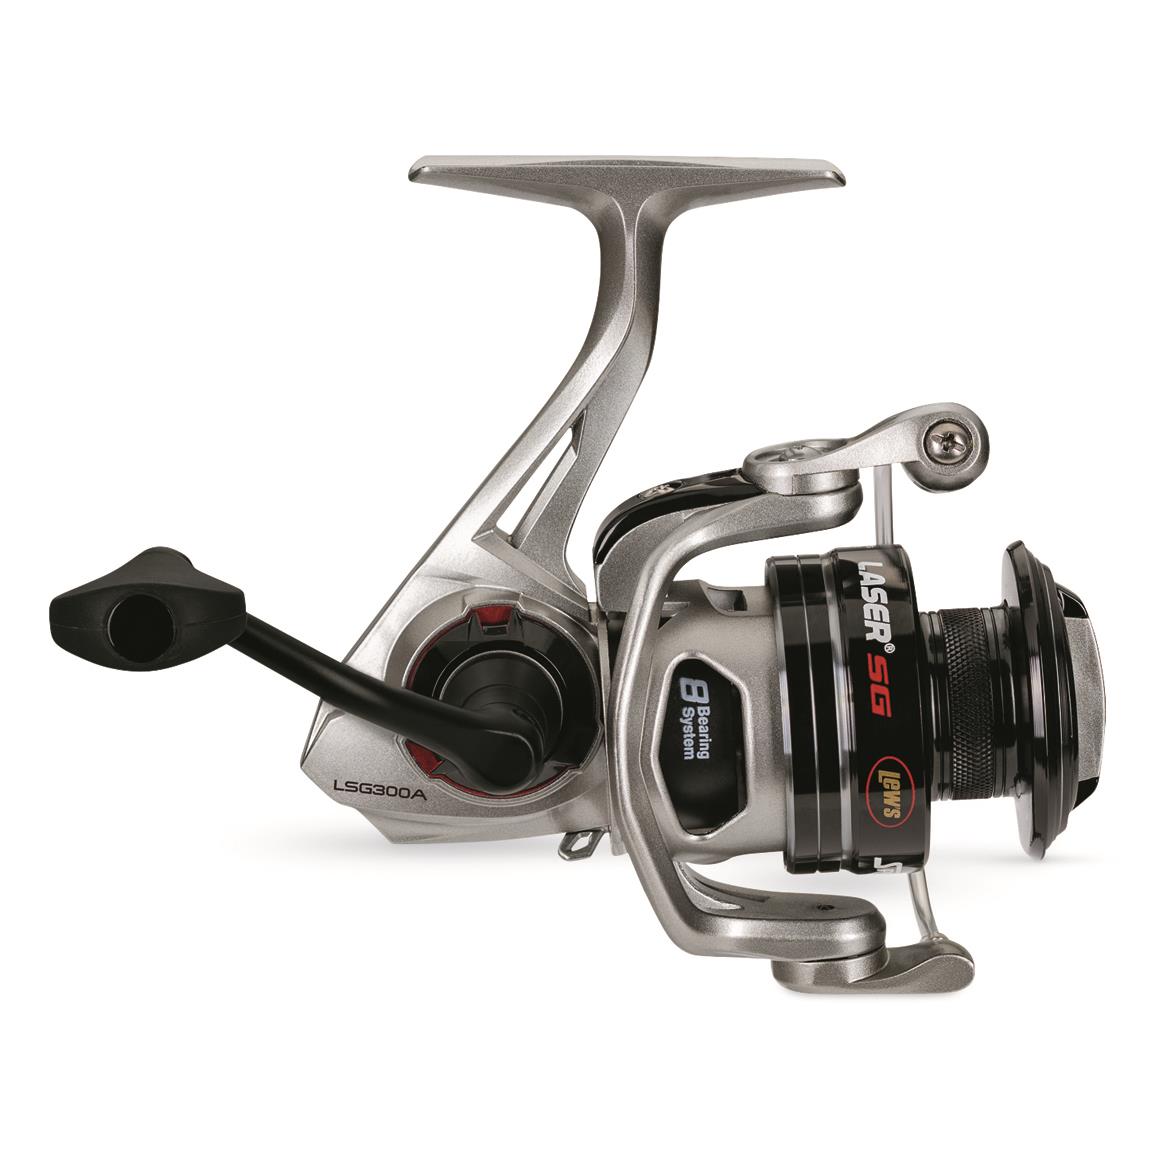 Mr. Crappie Crappie Thunder Pre-Spooled Spinning Reels - 732865, Spinning  Reels at Sportsman's Guide